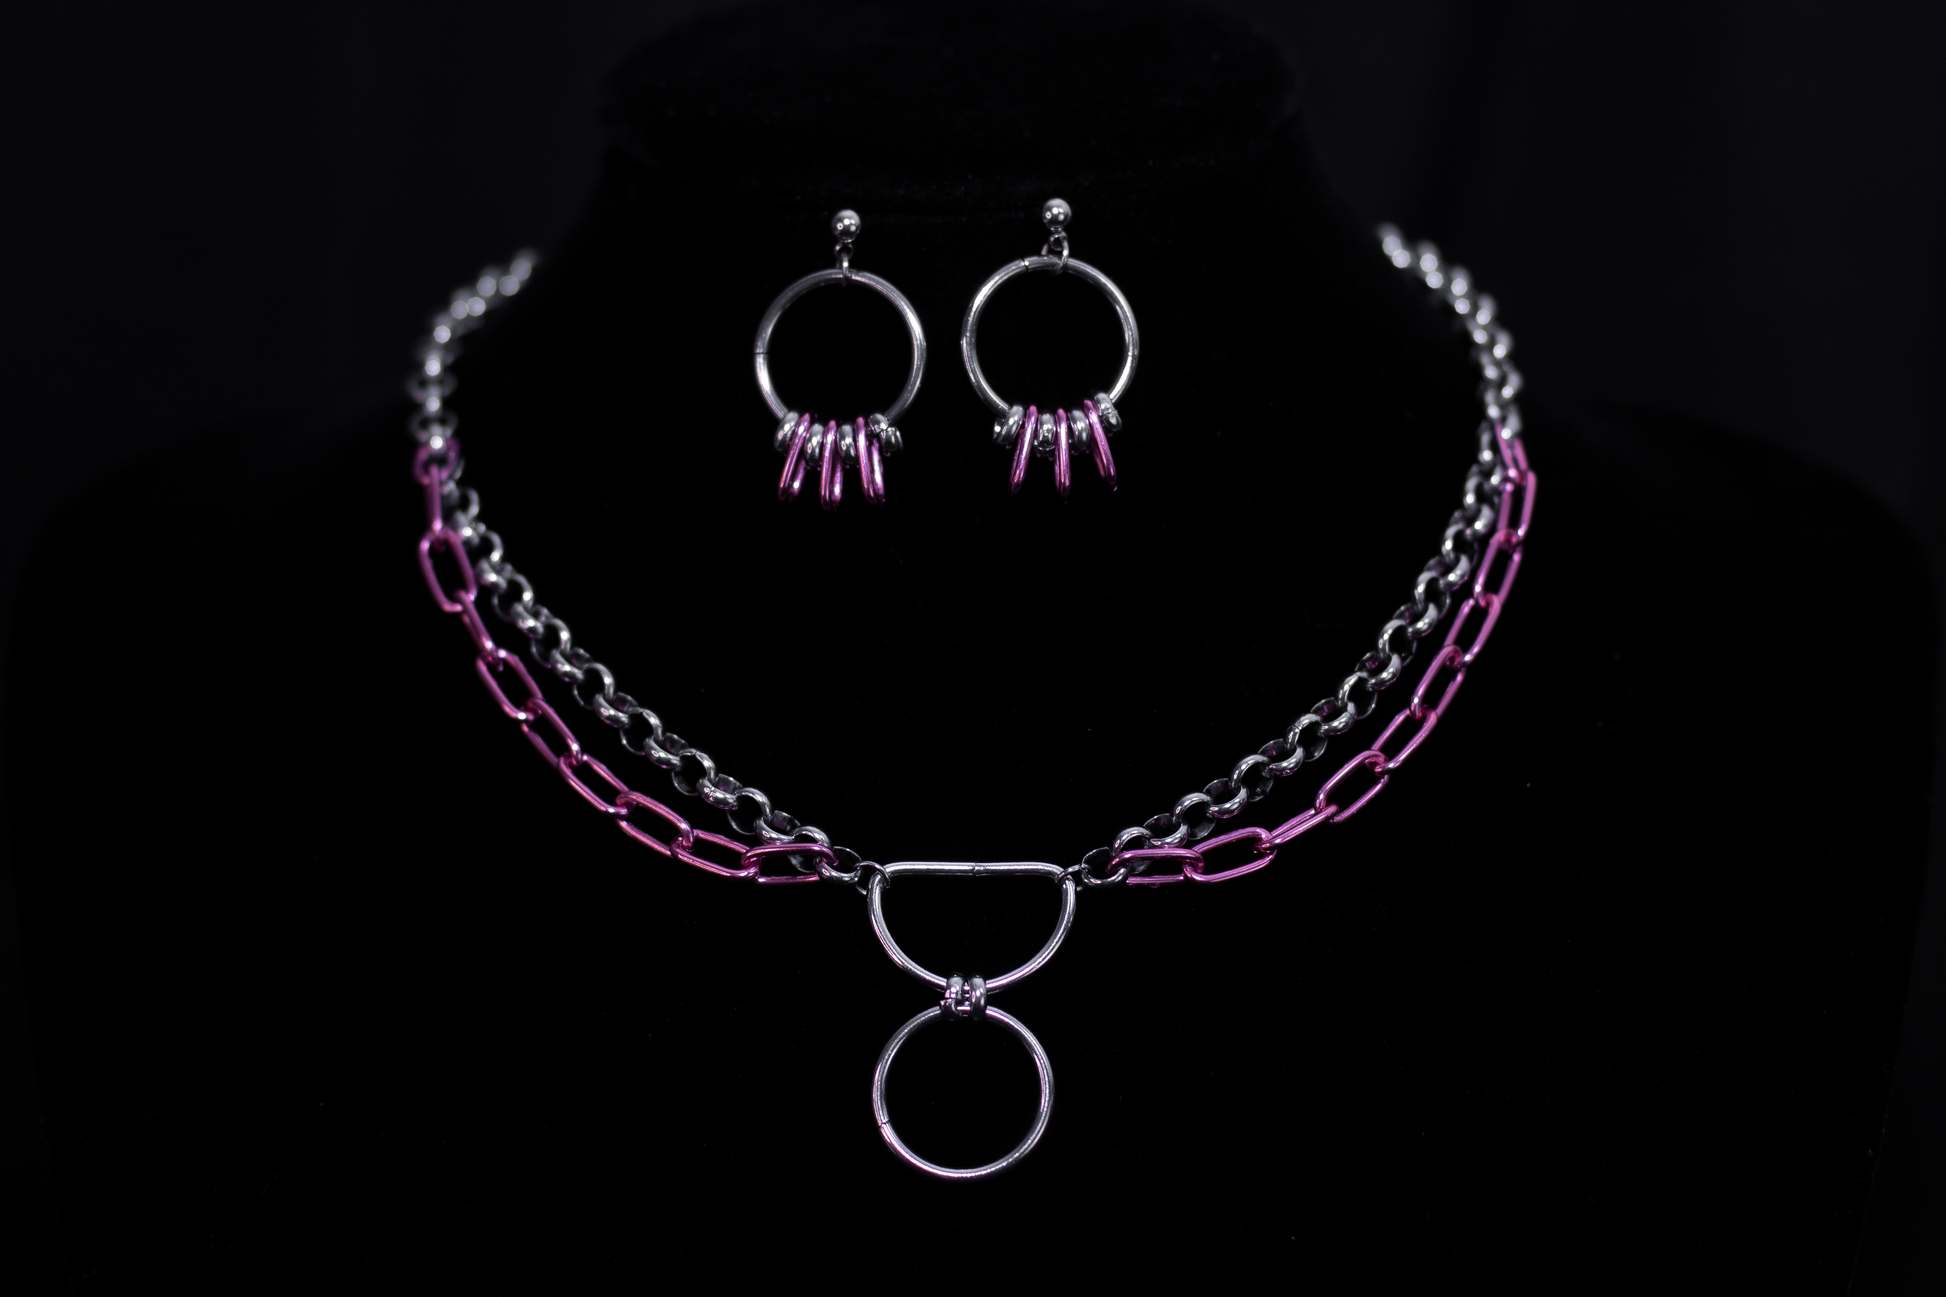 Showcasing Myril Jewels' signature neo-gothic flair, this image features small silver hoop earrings with vibrant pink accents, complemented by a matching layered chain necklace. Ideal for a goth girlfriend gift, these pieces are perfect for adding a bold statement to everyday wear or special events like festivals